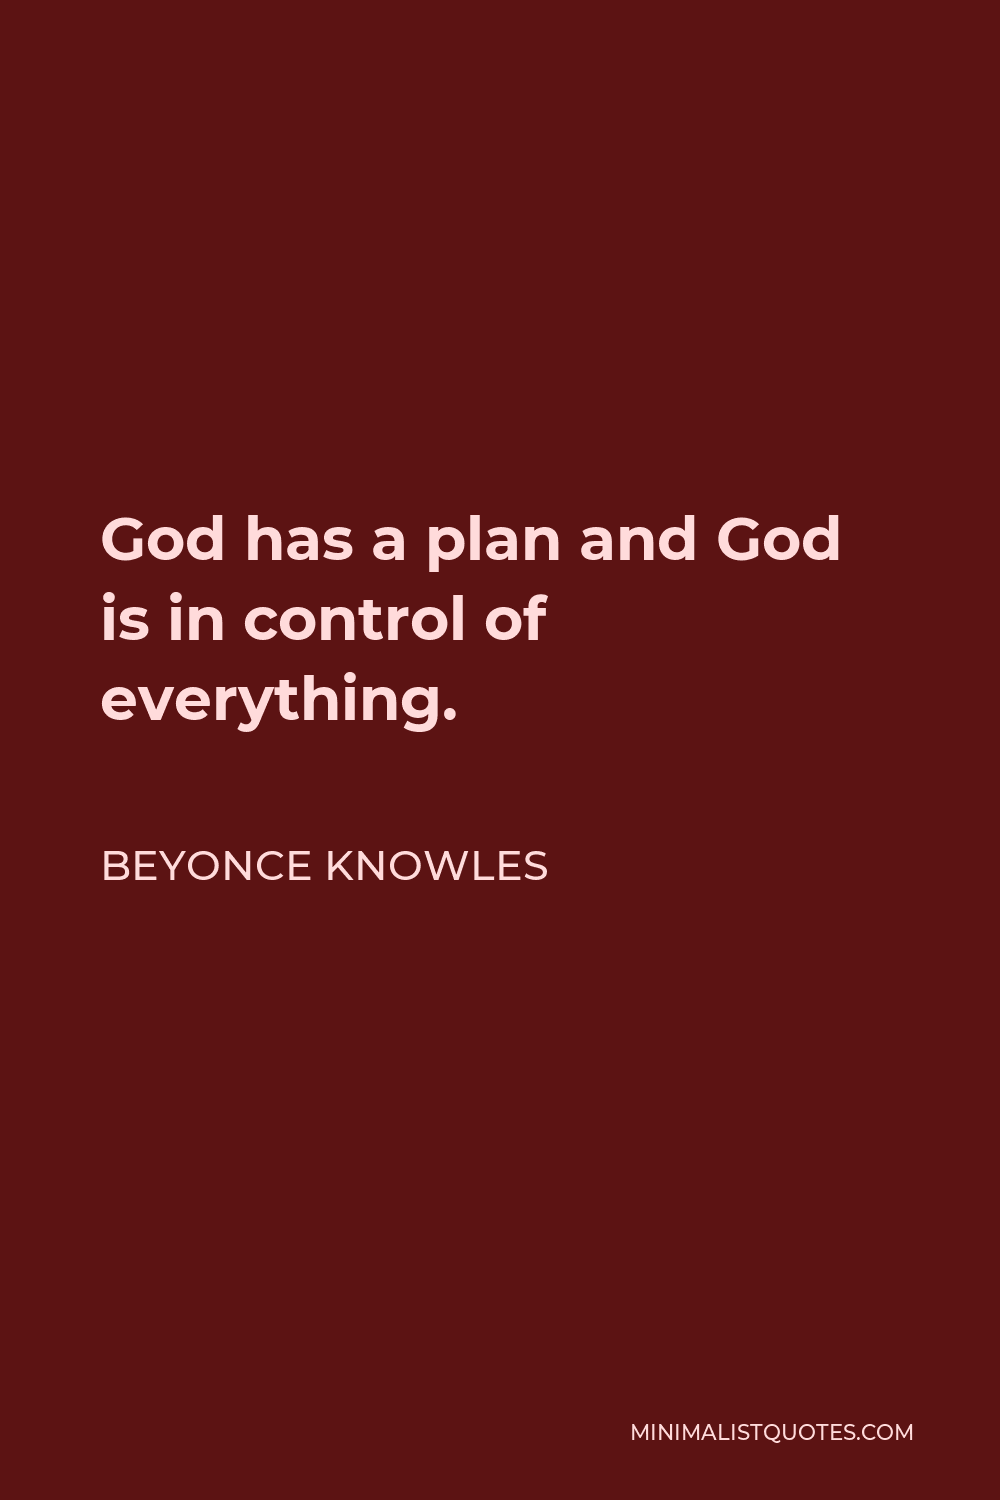 Beyonce Knowles Quote - God has a plan and God is in control of everything.